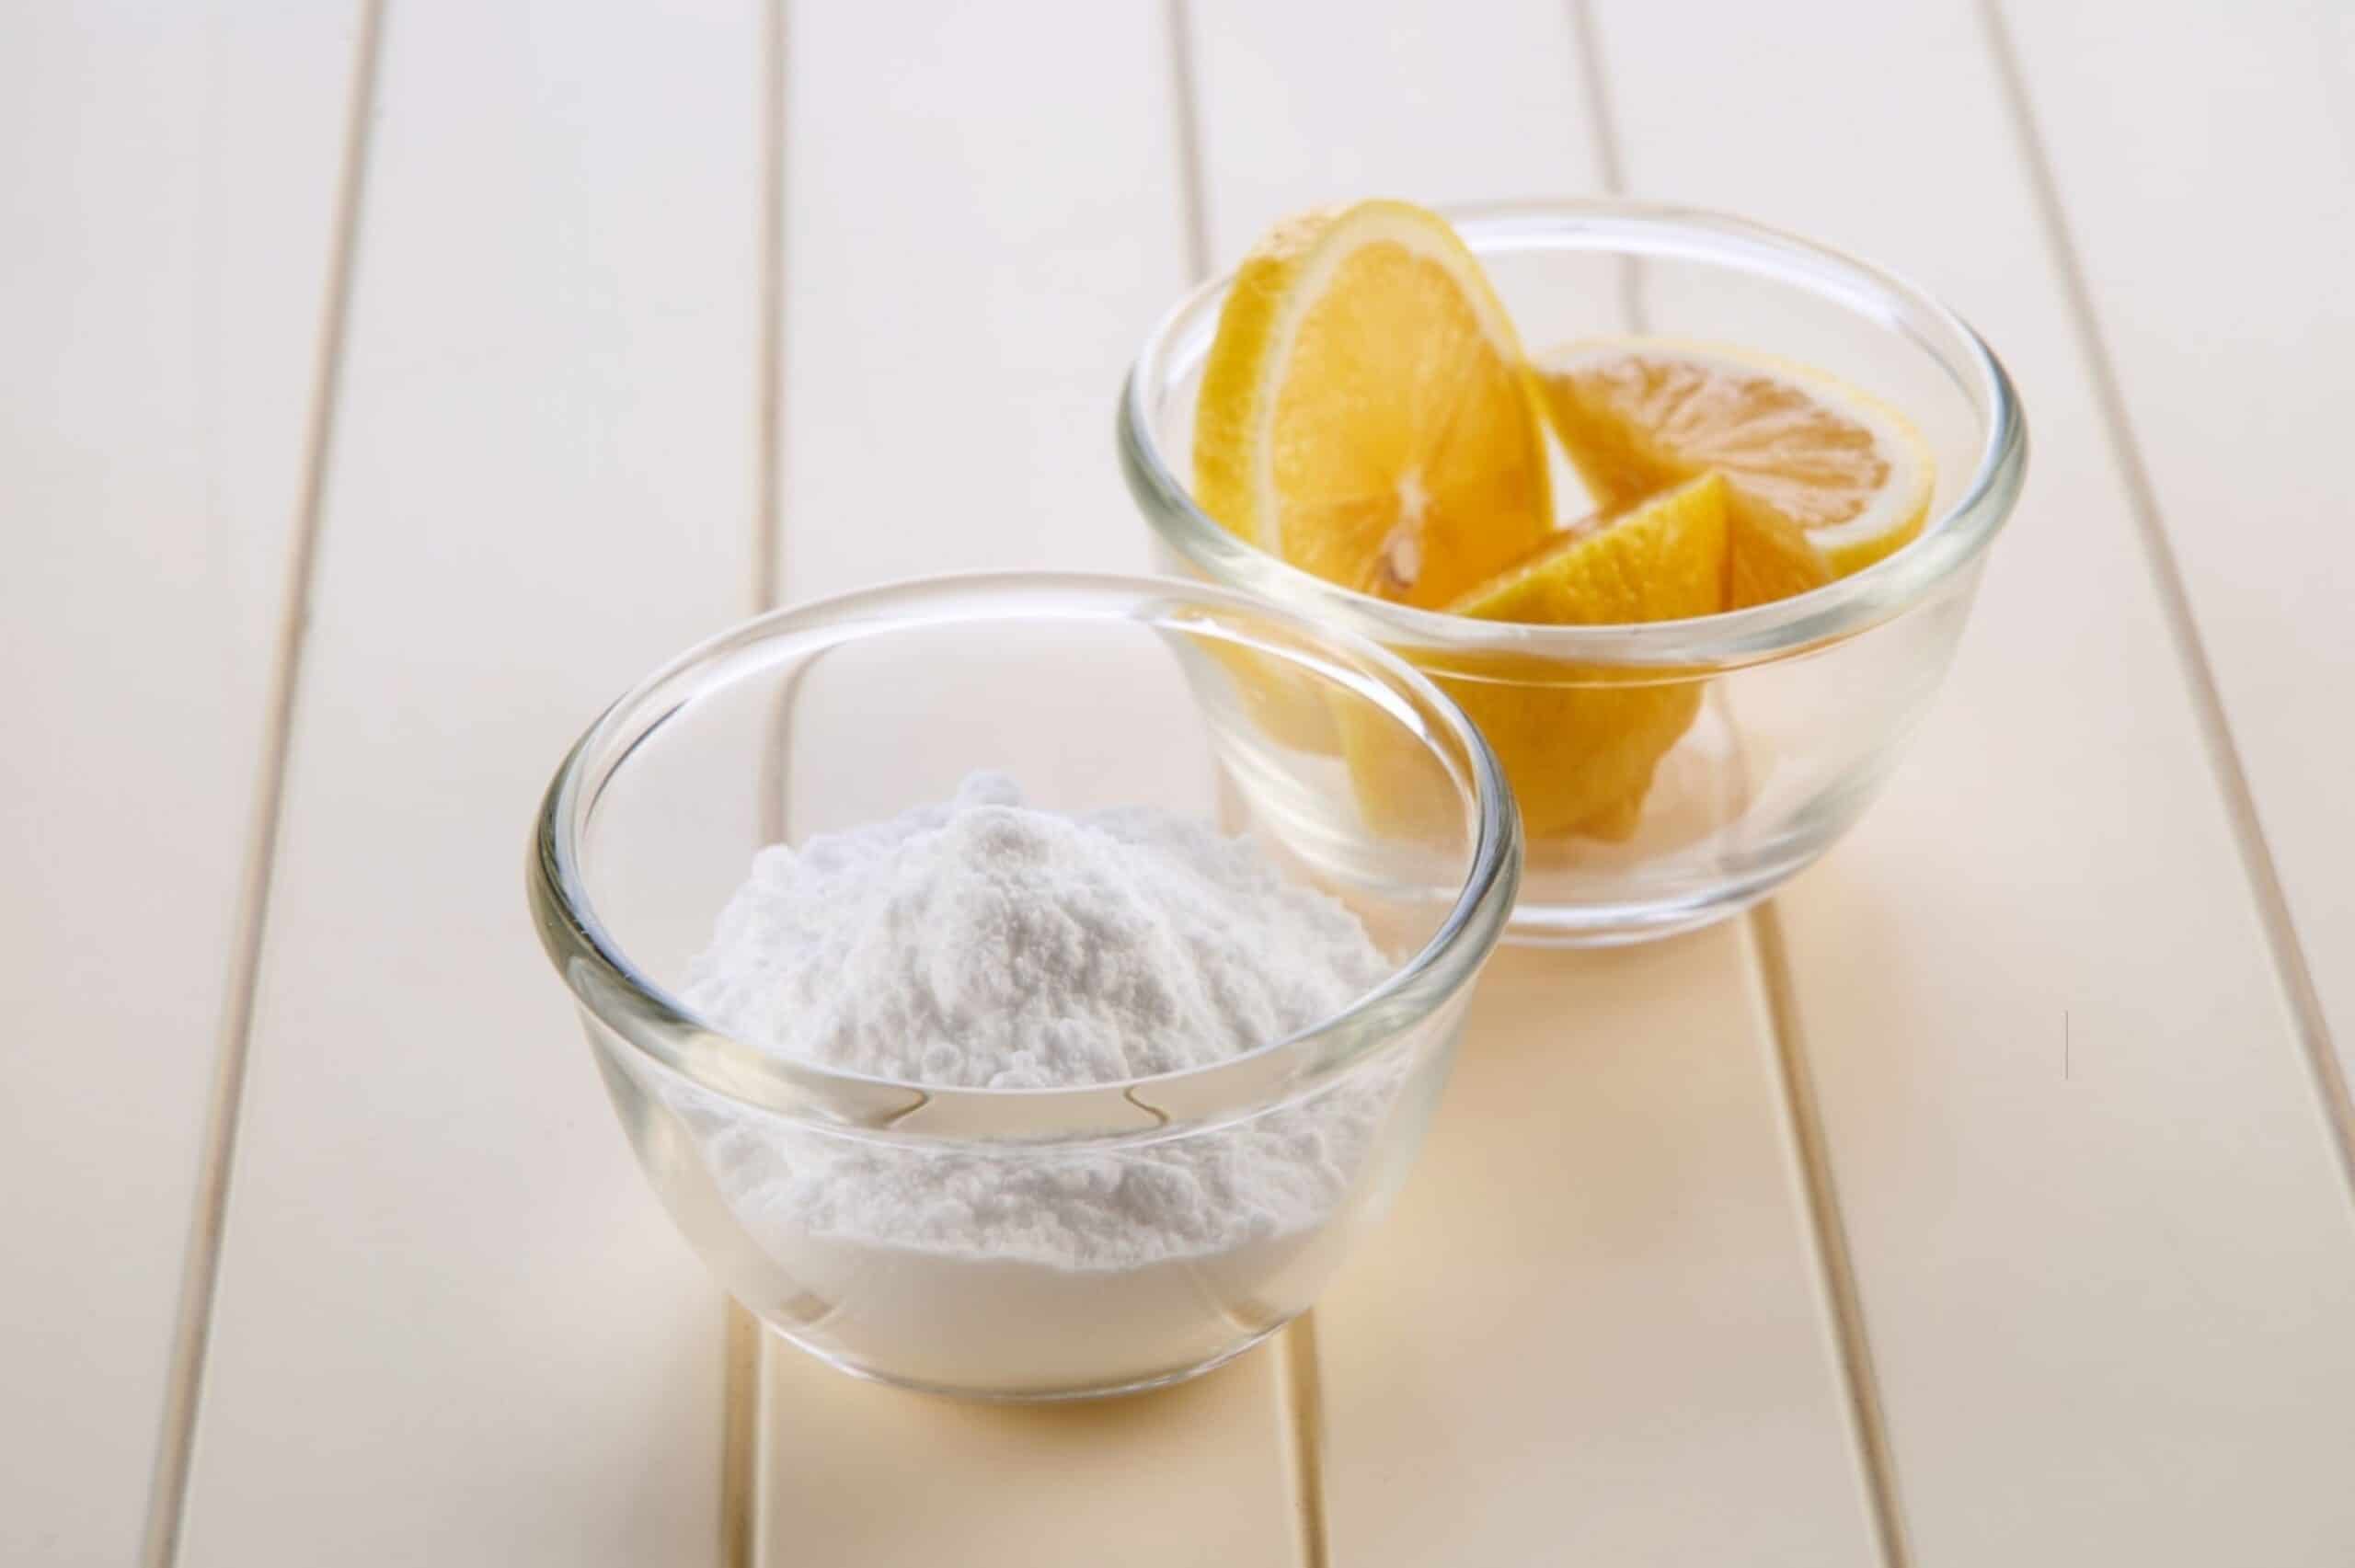 Expert tips for cleaning tarnished silver tidyhere image lemon and Baking Soda